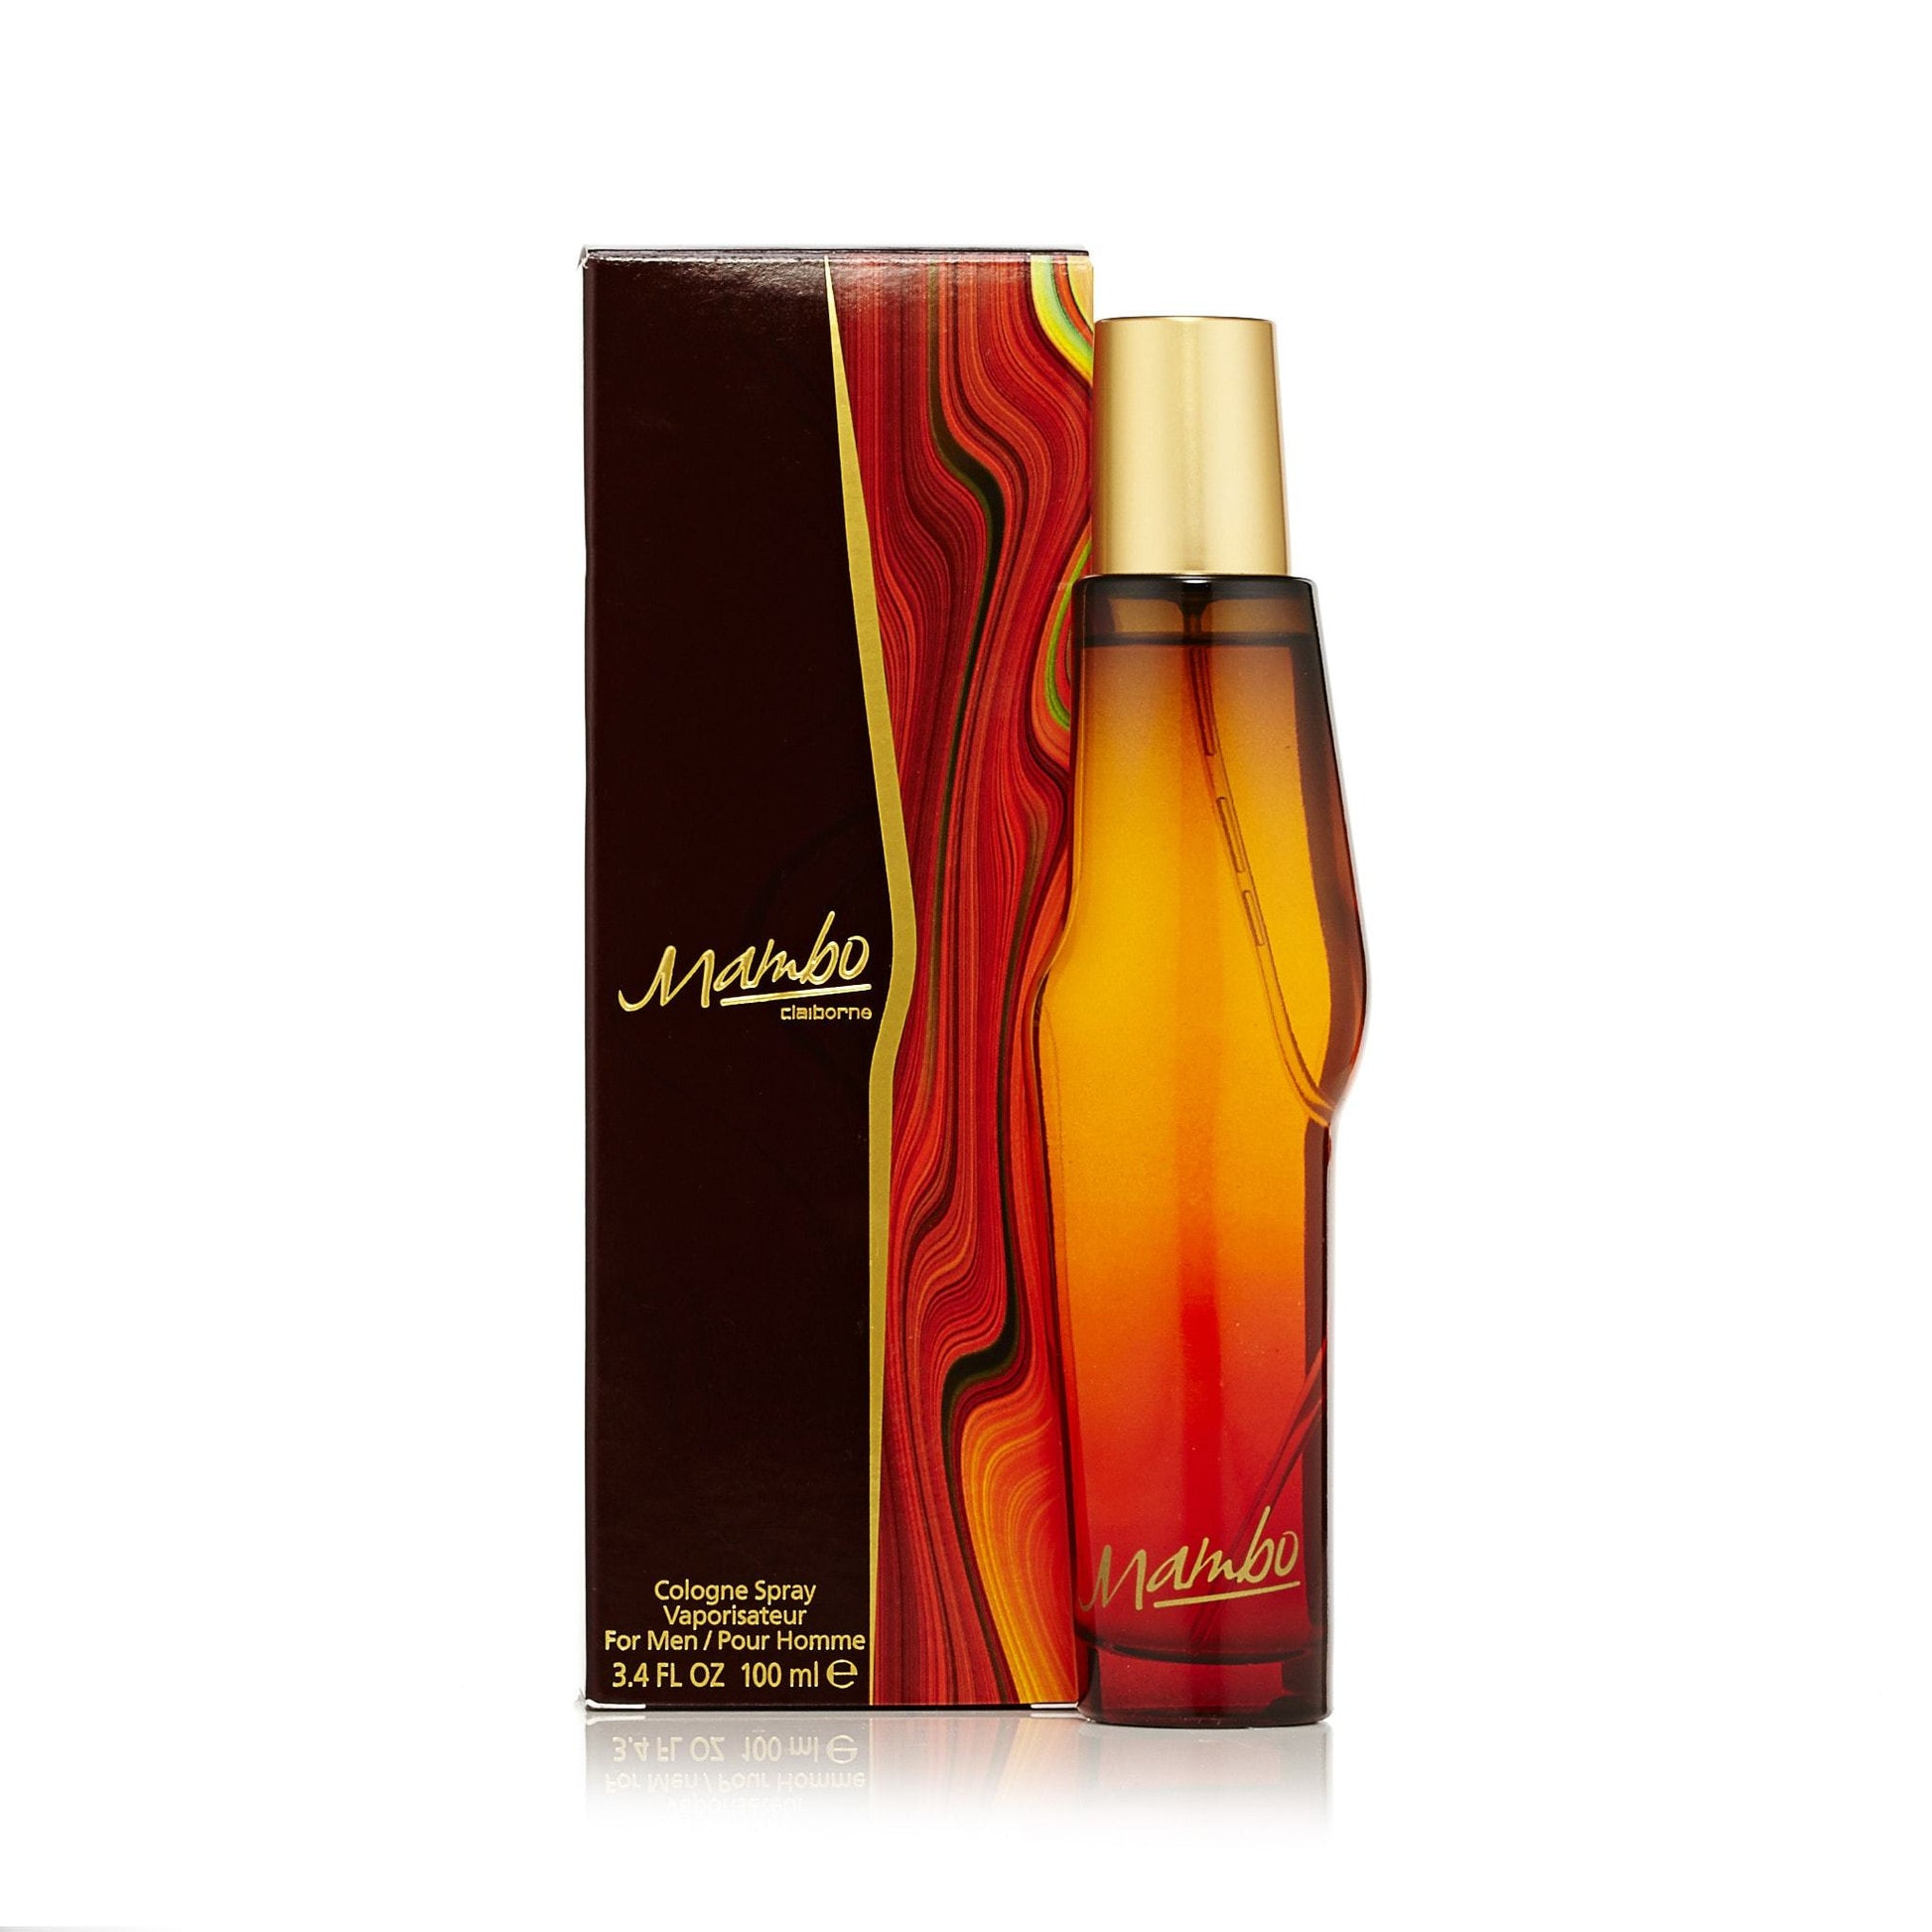 Mambo Cologne Spray for Men by Claiborne, Product image 2